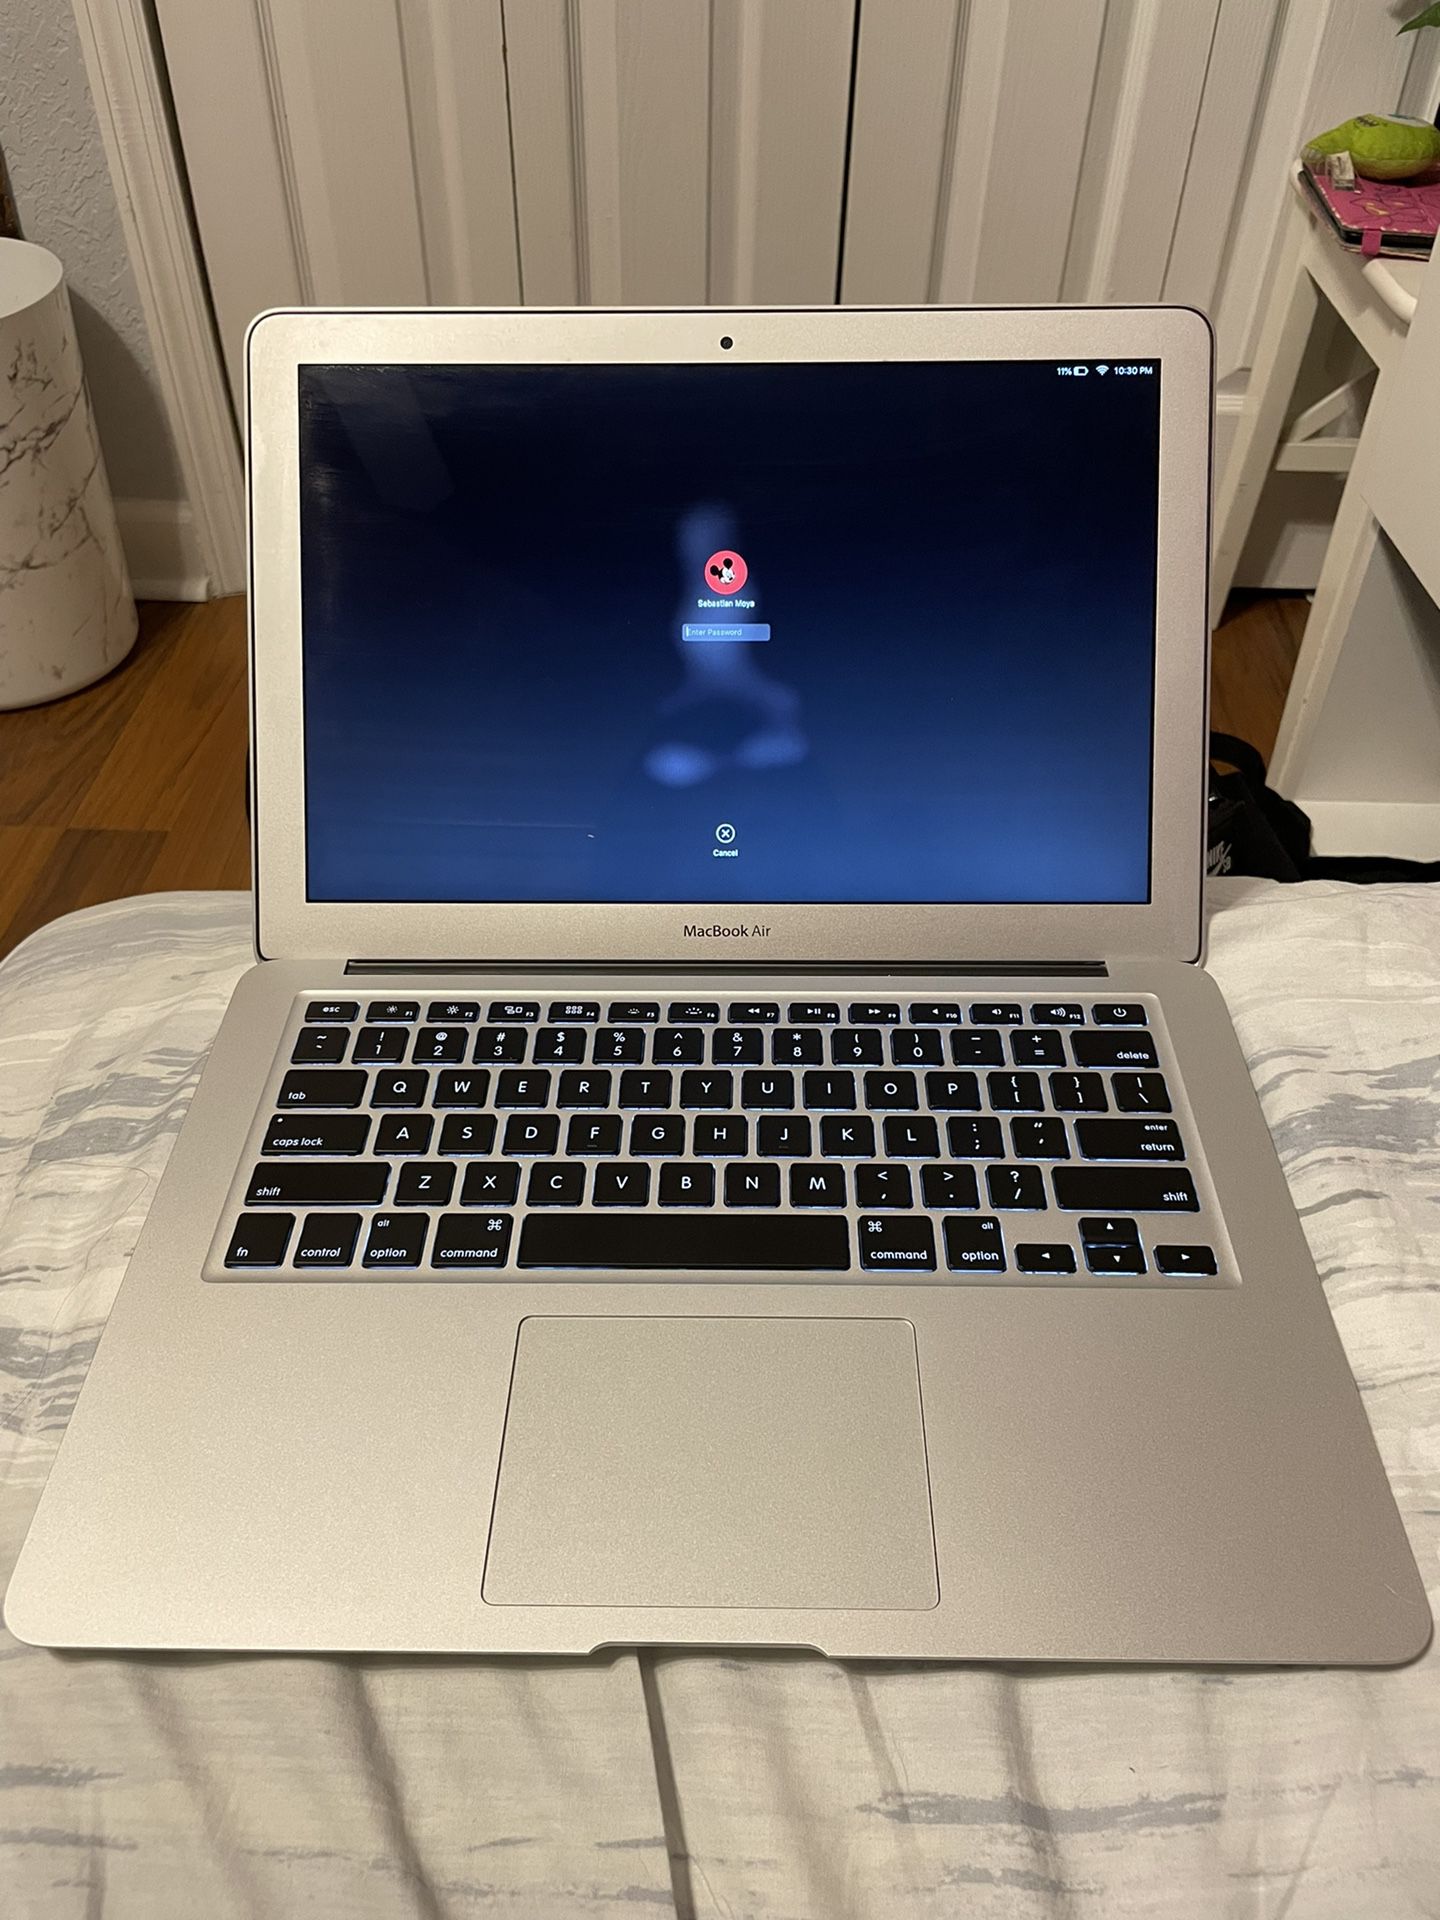 MINT CONDITION 2015 MacBook Air 13 In. $420 OBO